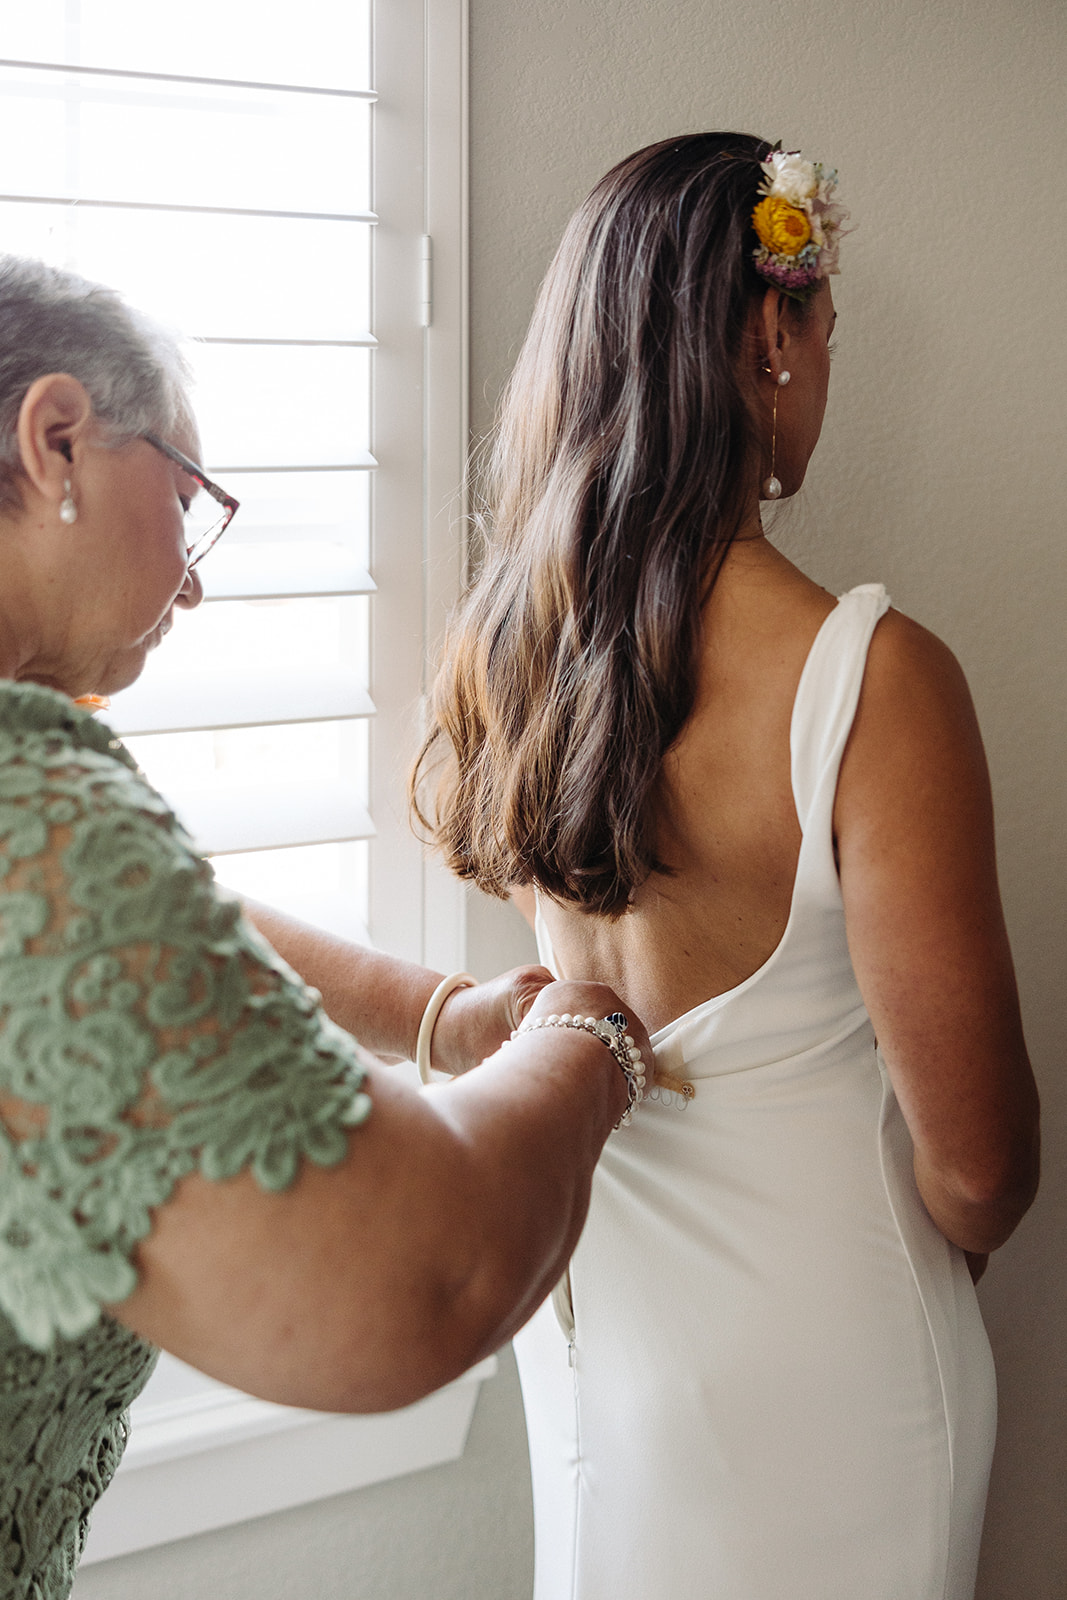 The mother of the bride helping her daughter zip up and fasten the timeless low-back gown.